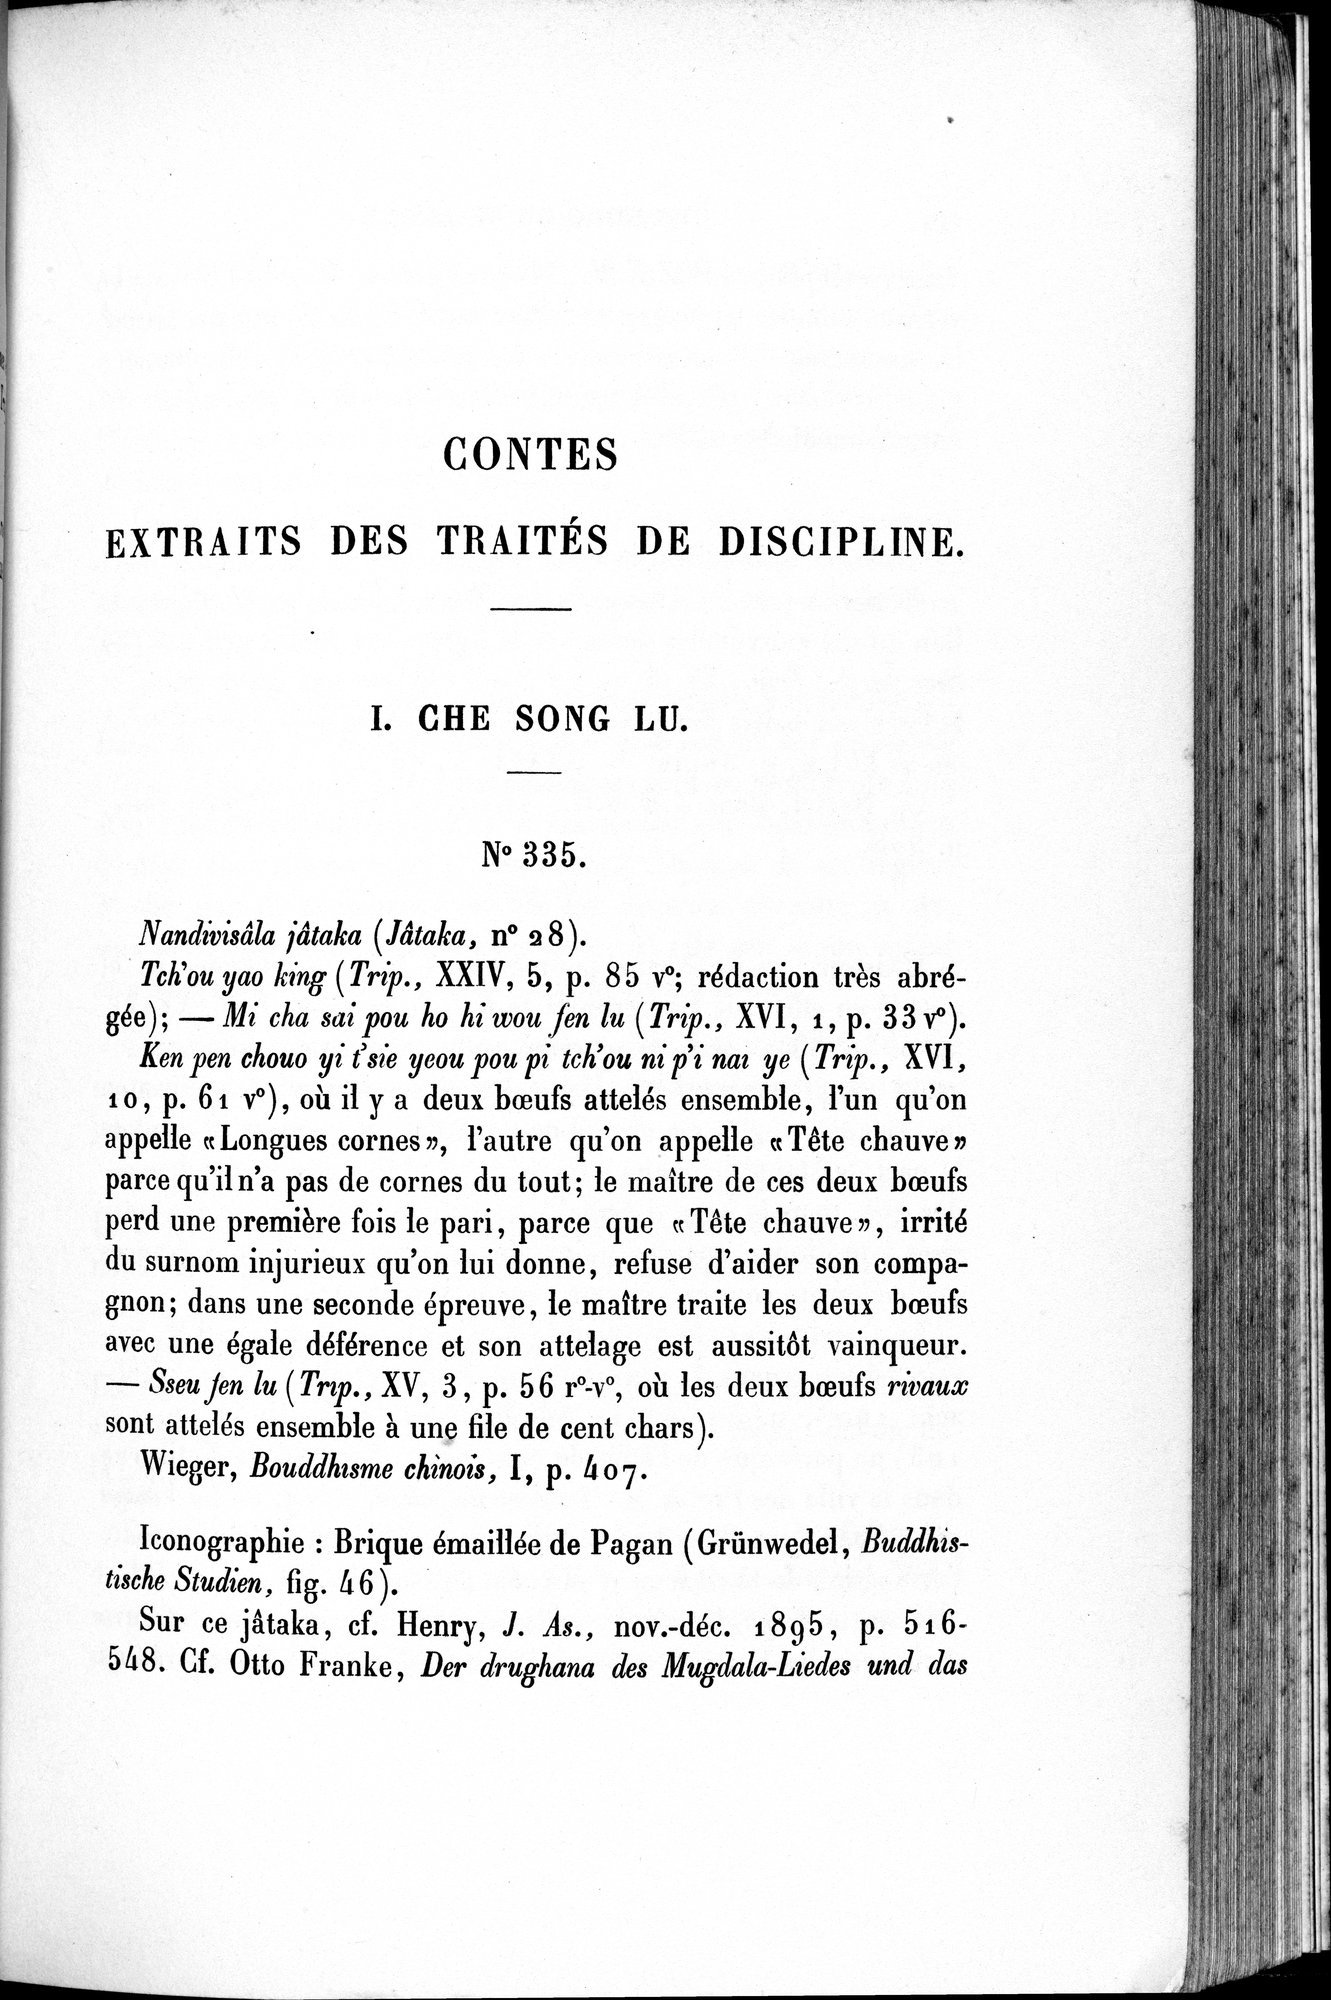 Cinq Cents Contes et Apologues : vol.4 / Page 191 (Grayscale High Resolution Image)